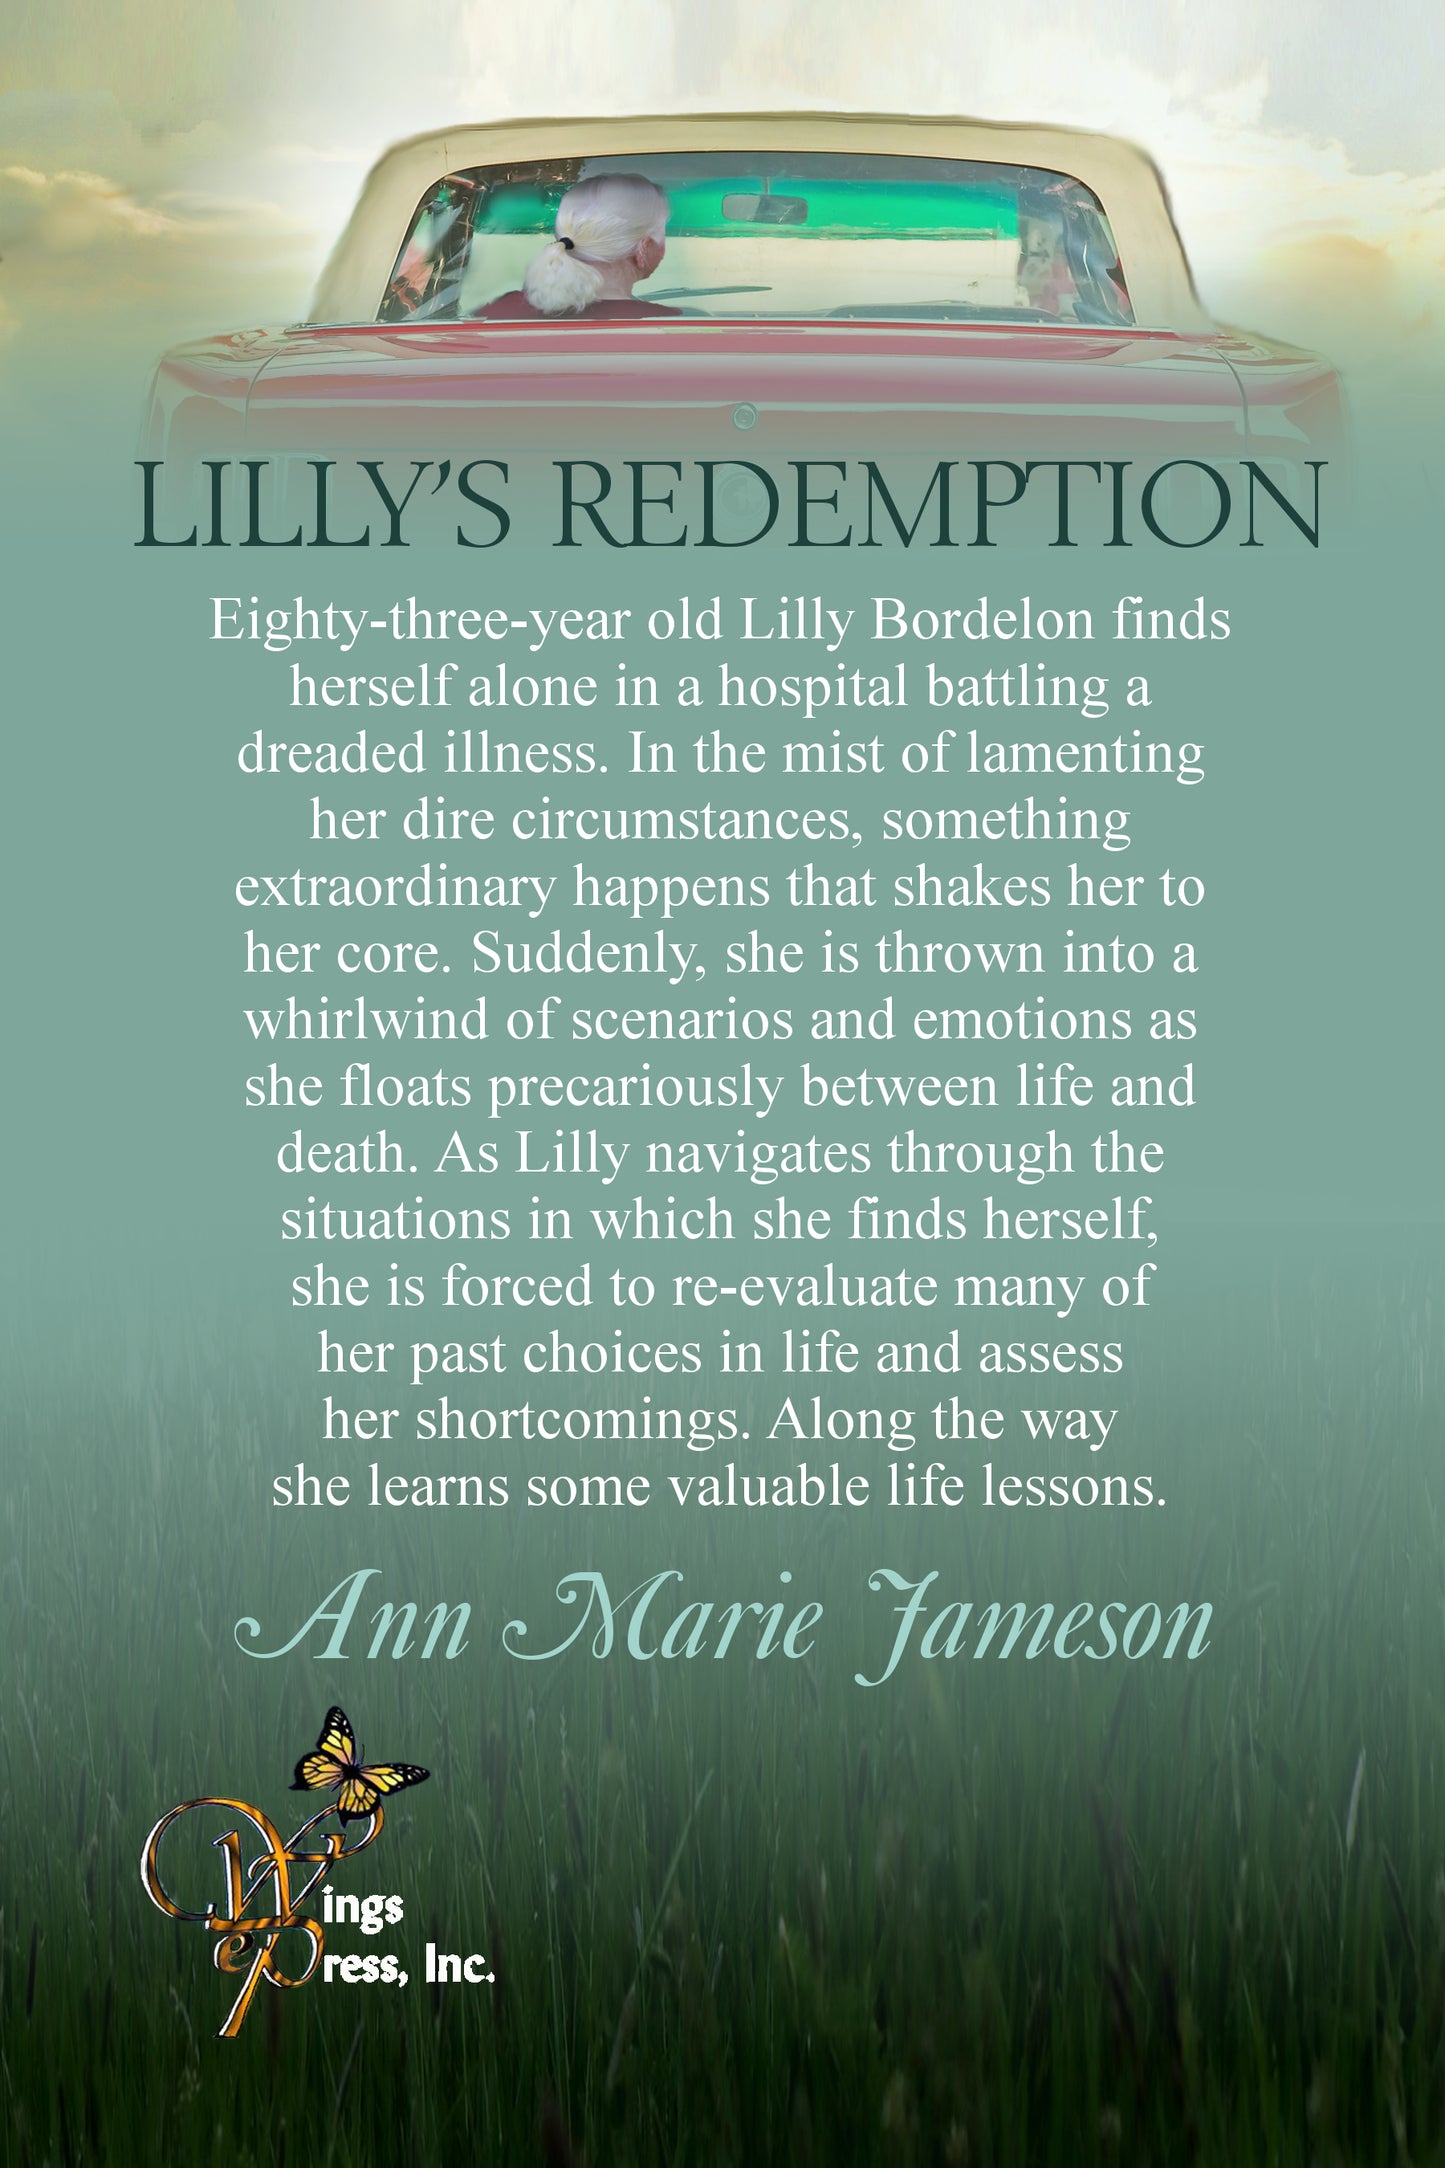 Lilly’s Redemption